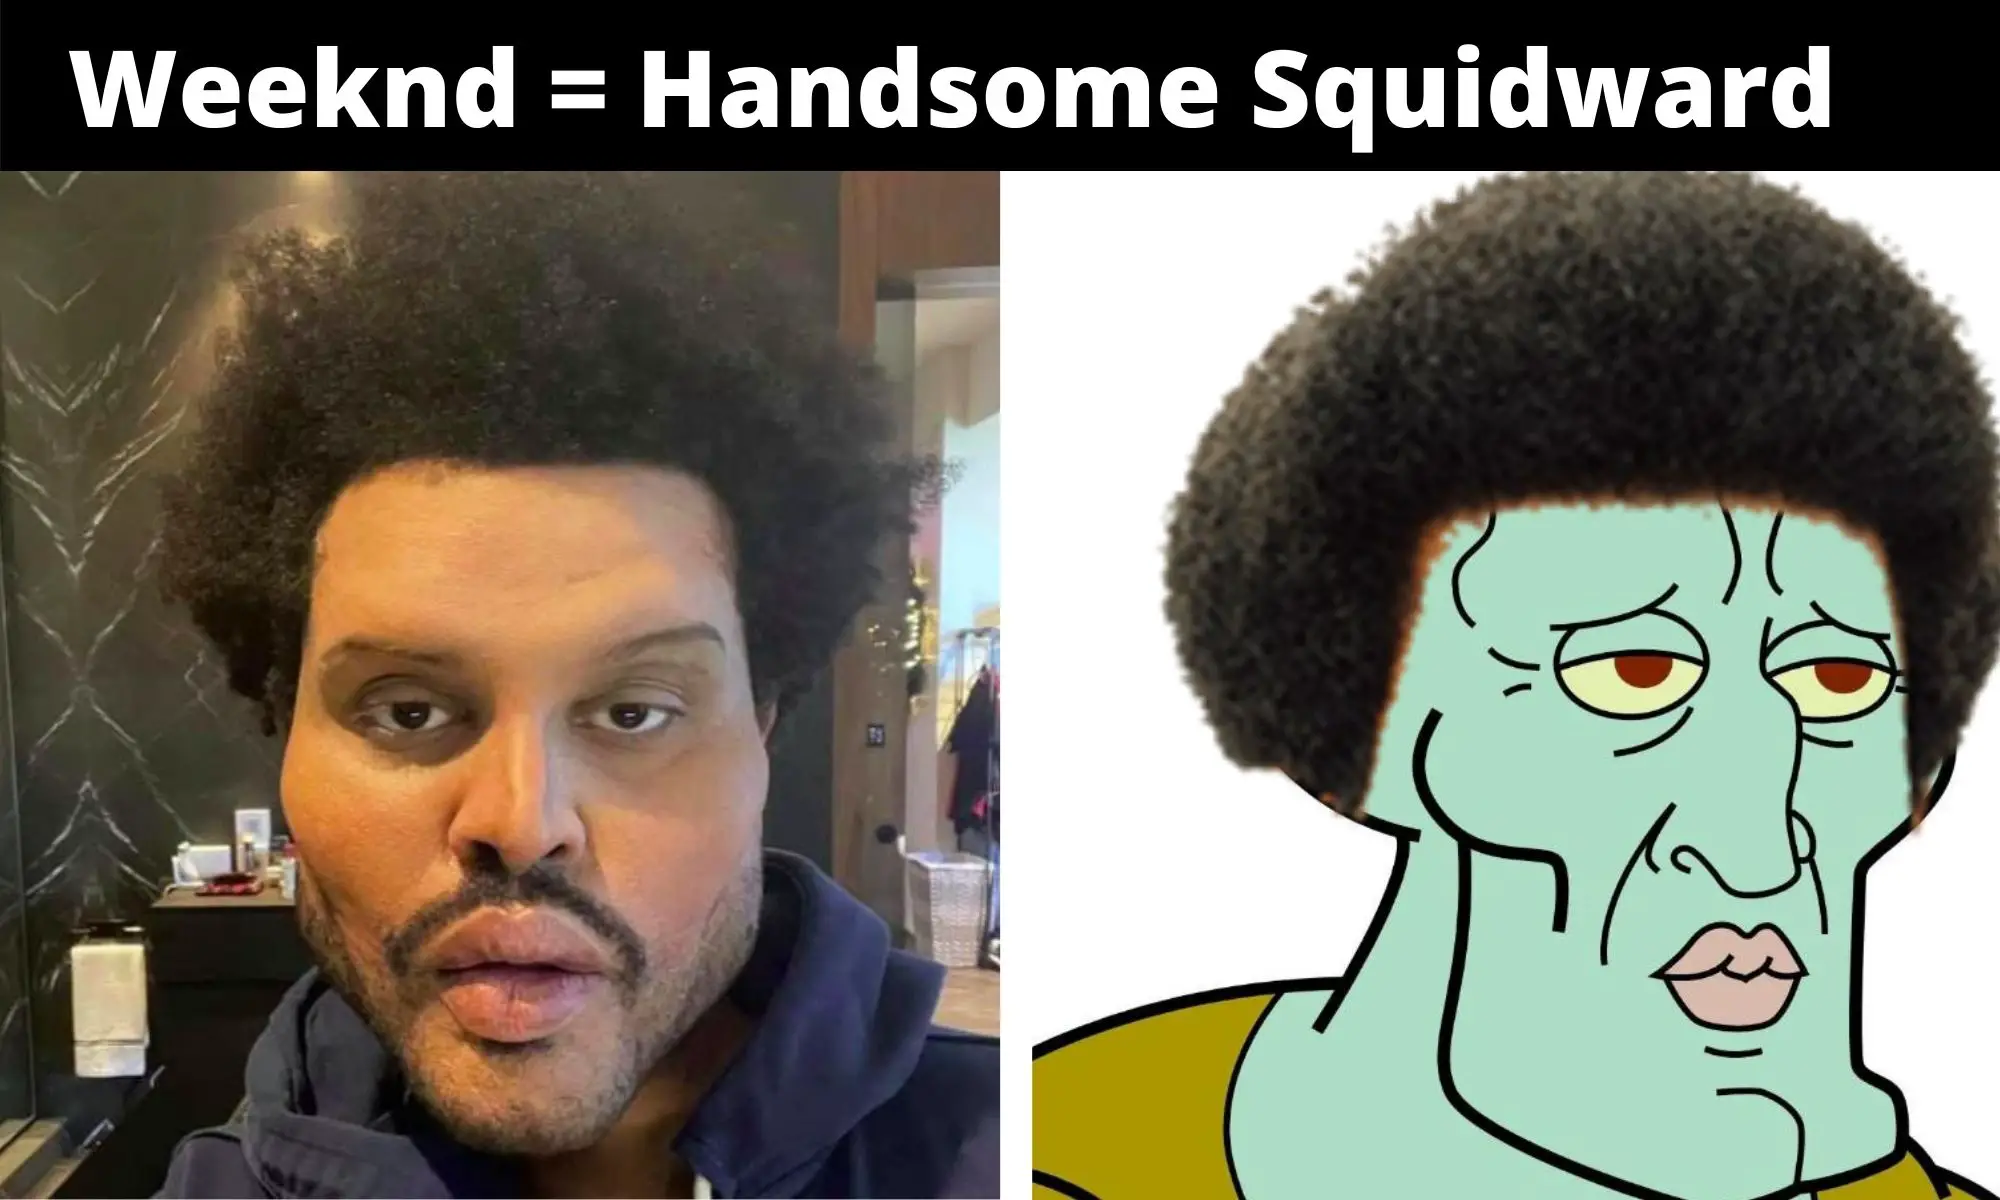 The Weeknd Plastic Surgery Meme On Handsome Squidward